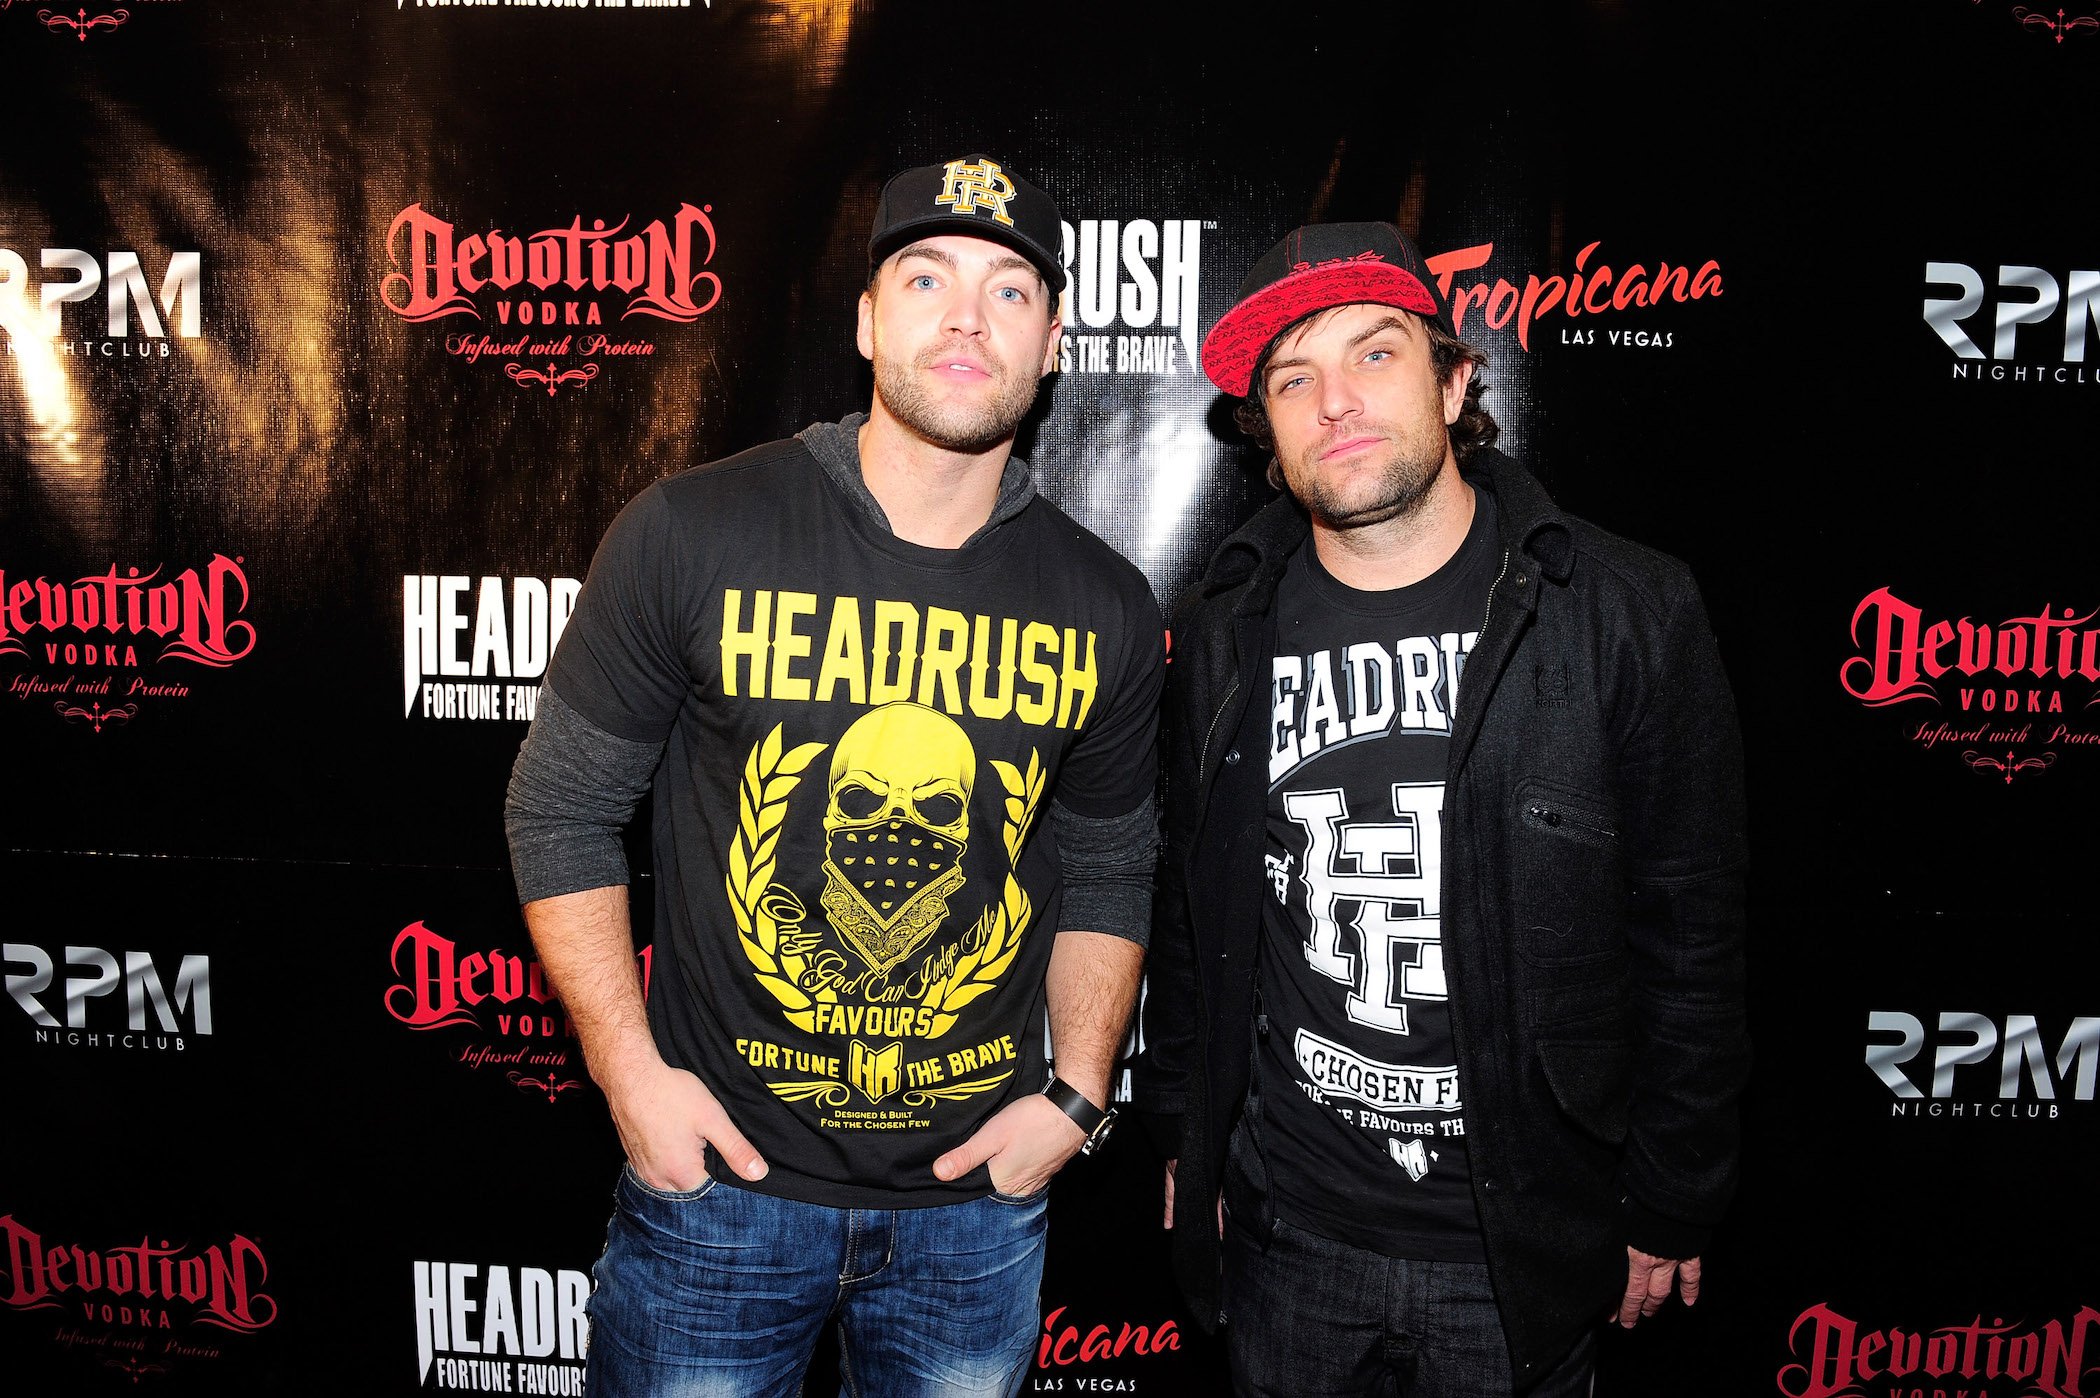 CT Tamburello and T.J. Lavin from MTV's 'The Challenge' Season 37 standing next to each other at an event against a dark background